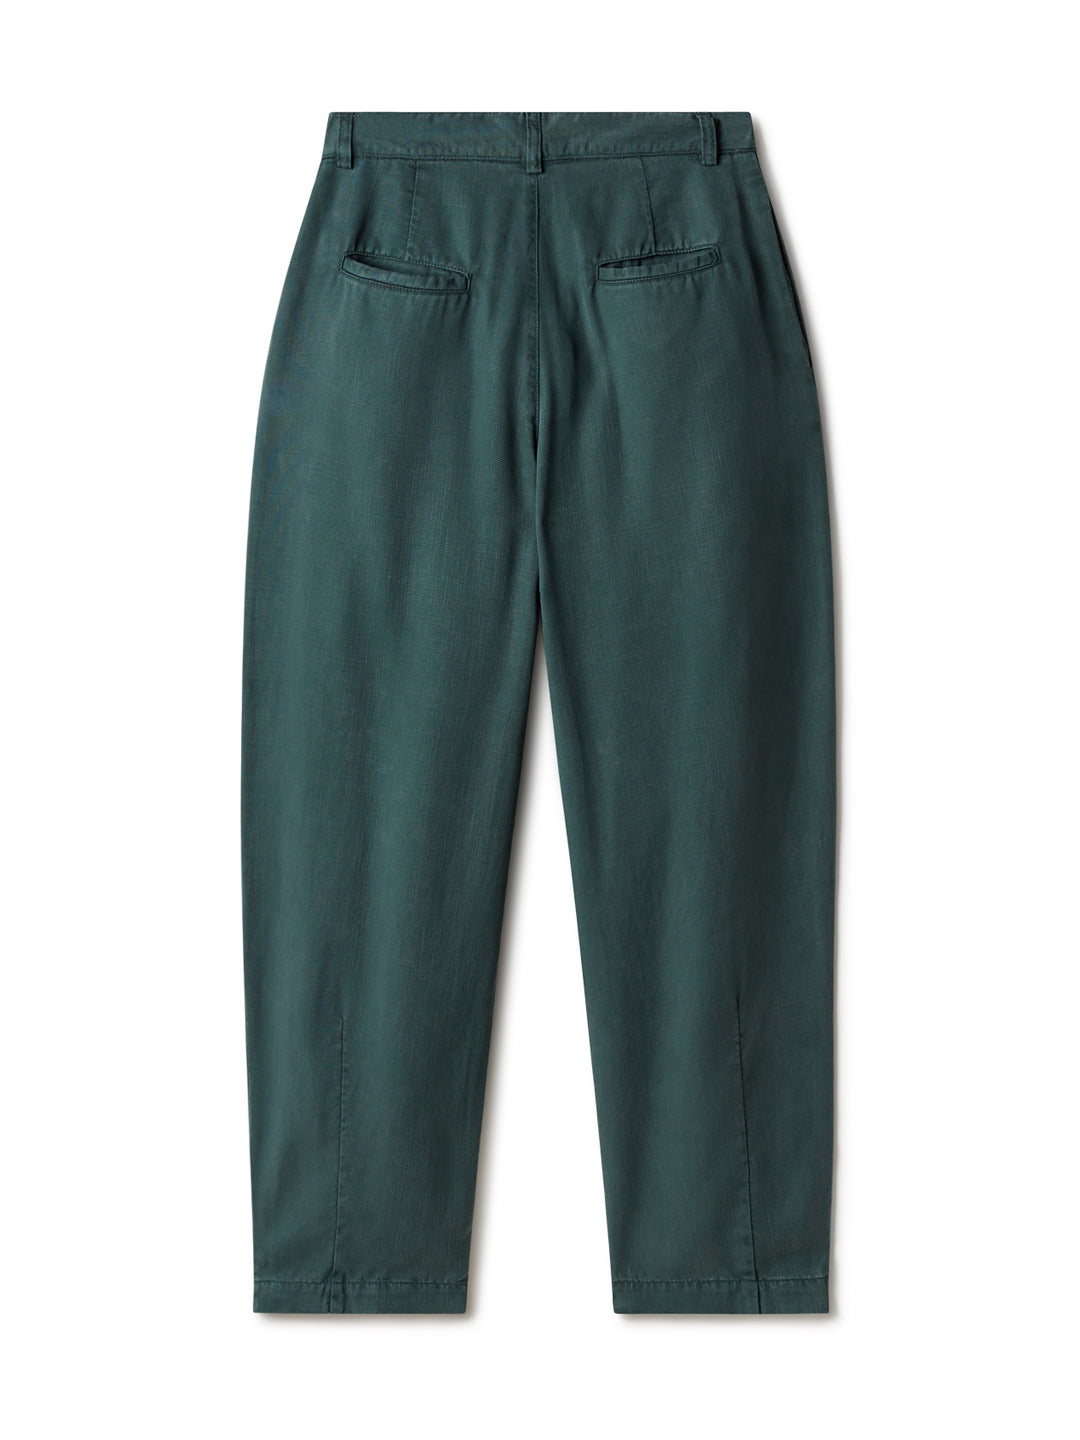 MODESTO FOREST GREEN PANTS